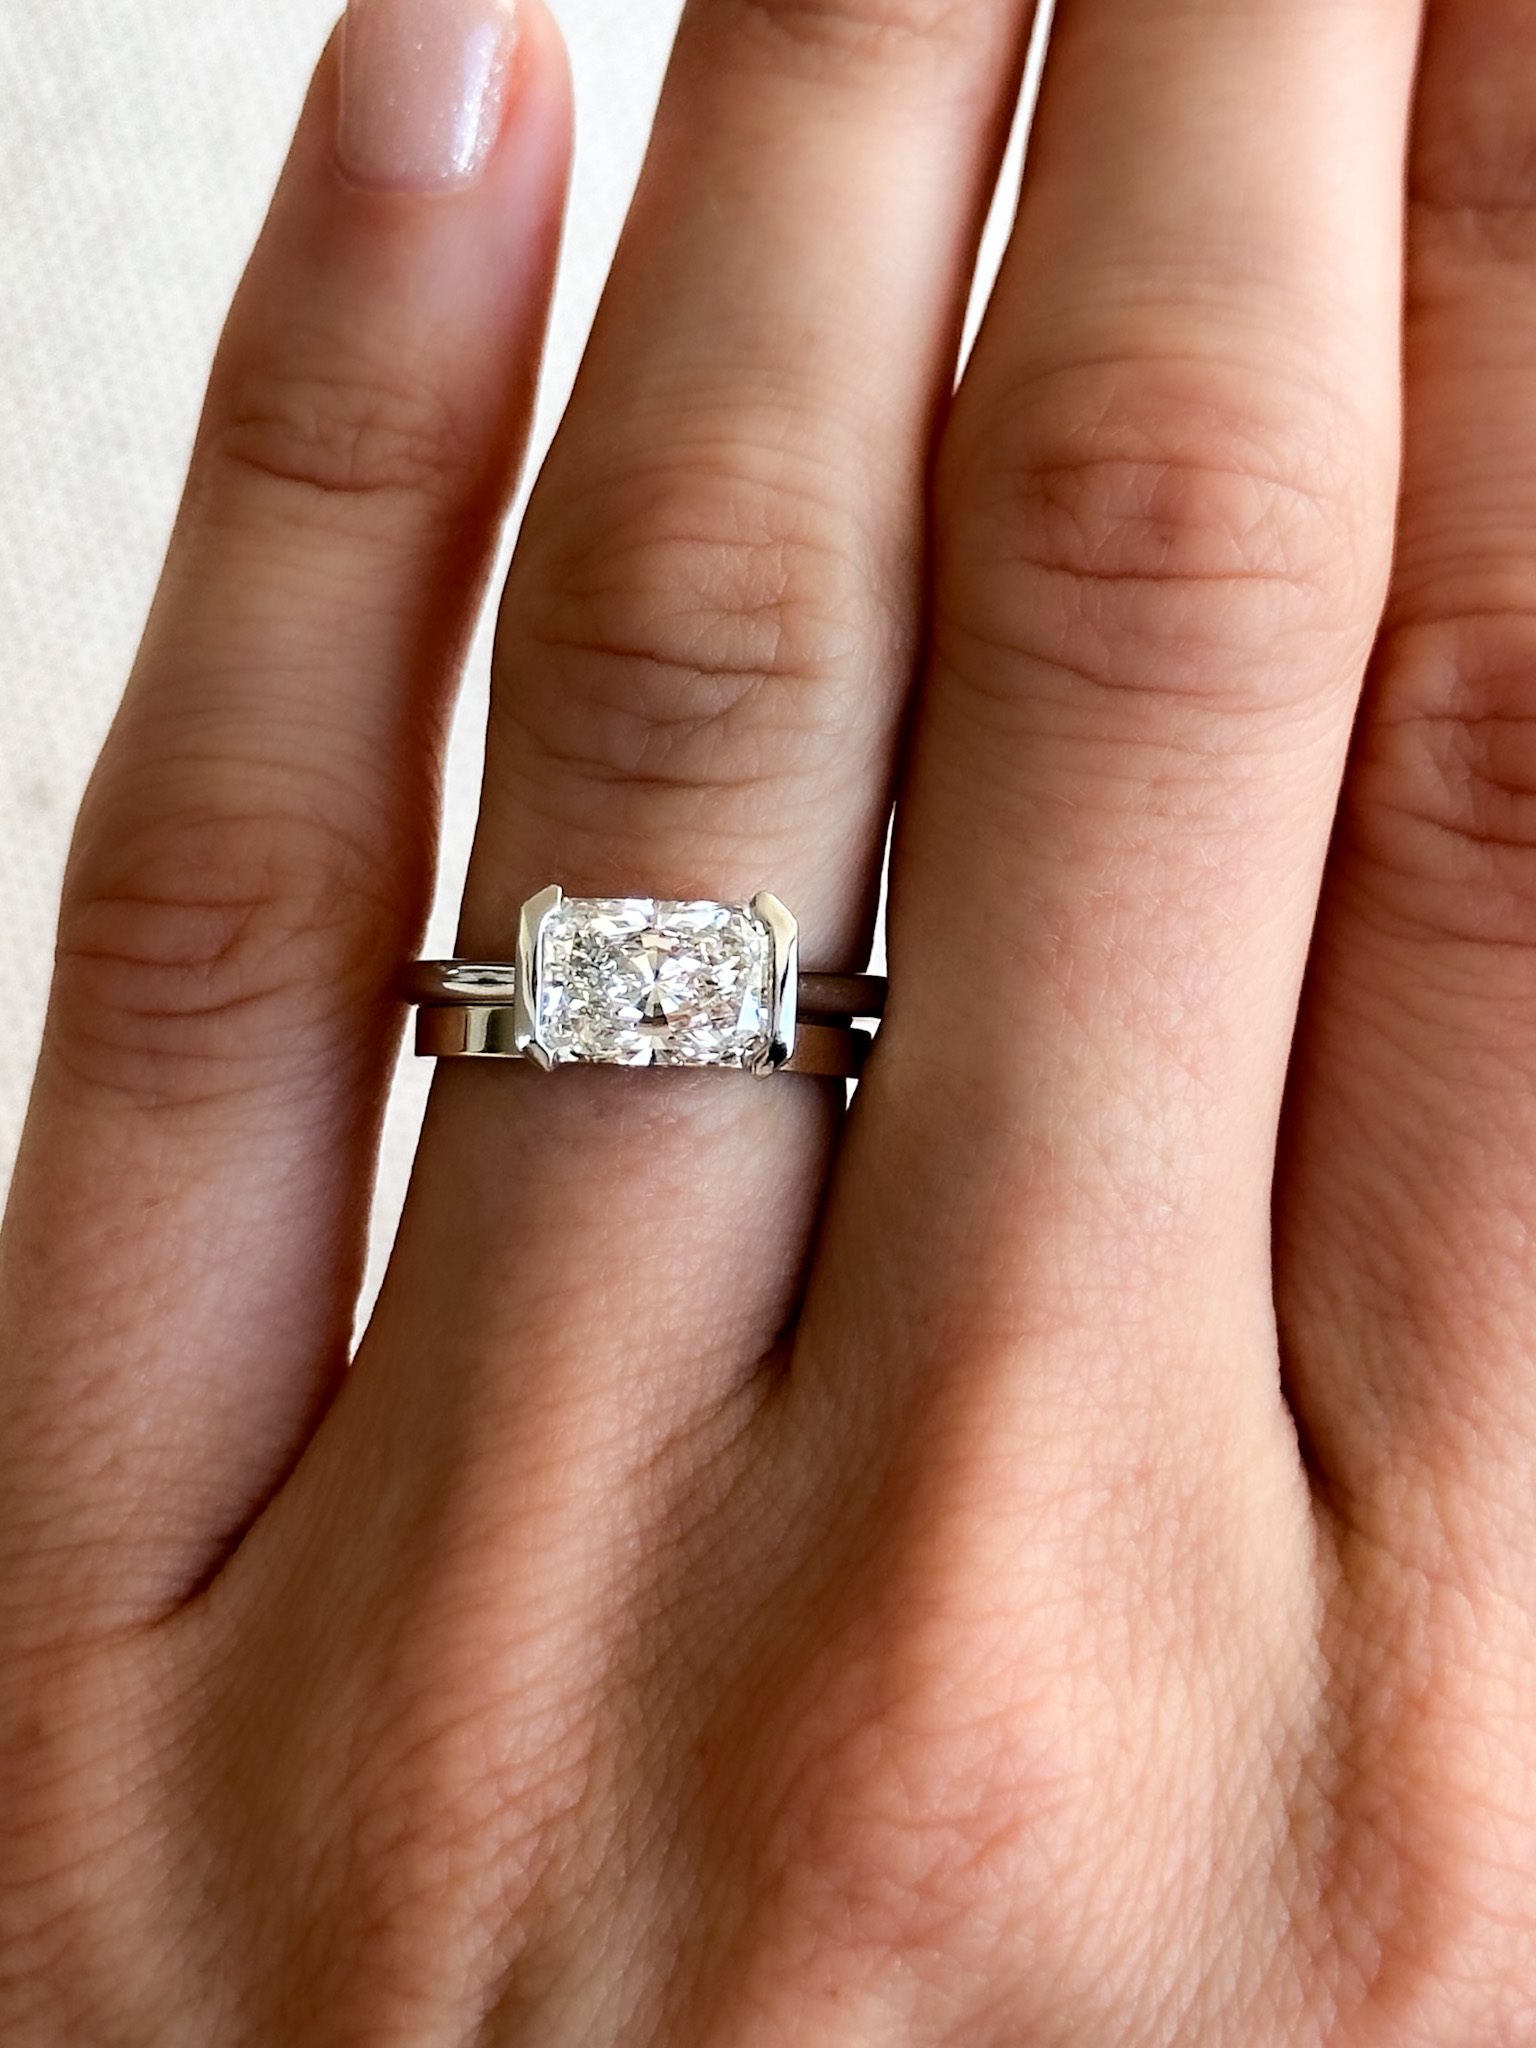 GOODSTONE East West Half Bezel Solitaire Engagement Ring With Elongated Radiant Cut Diamond